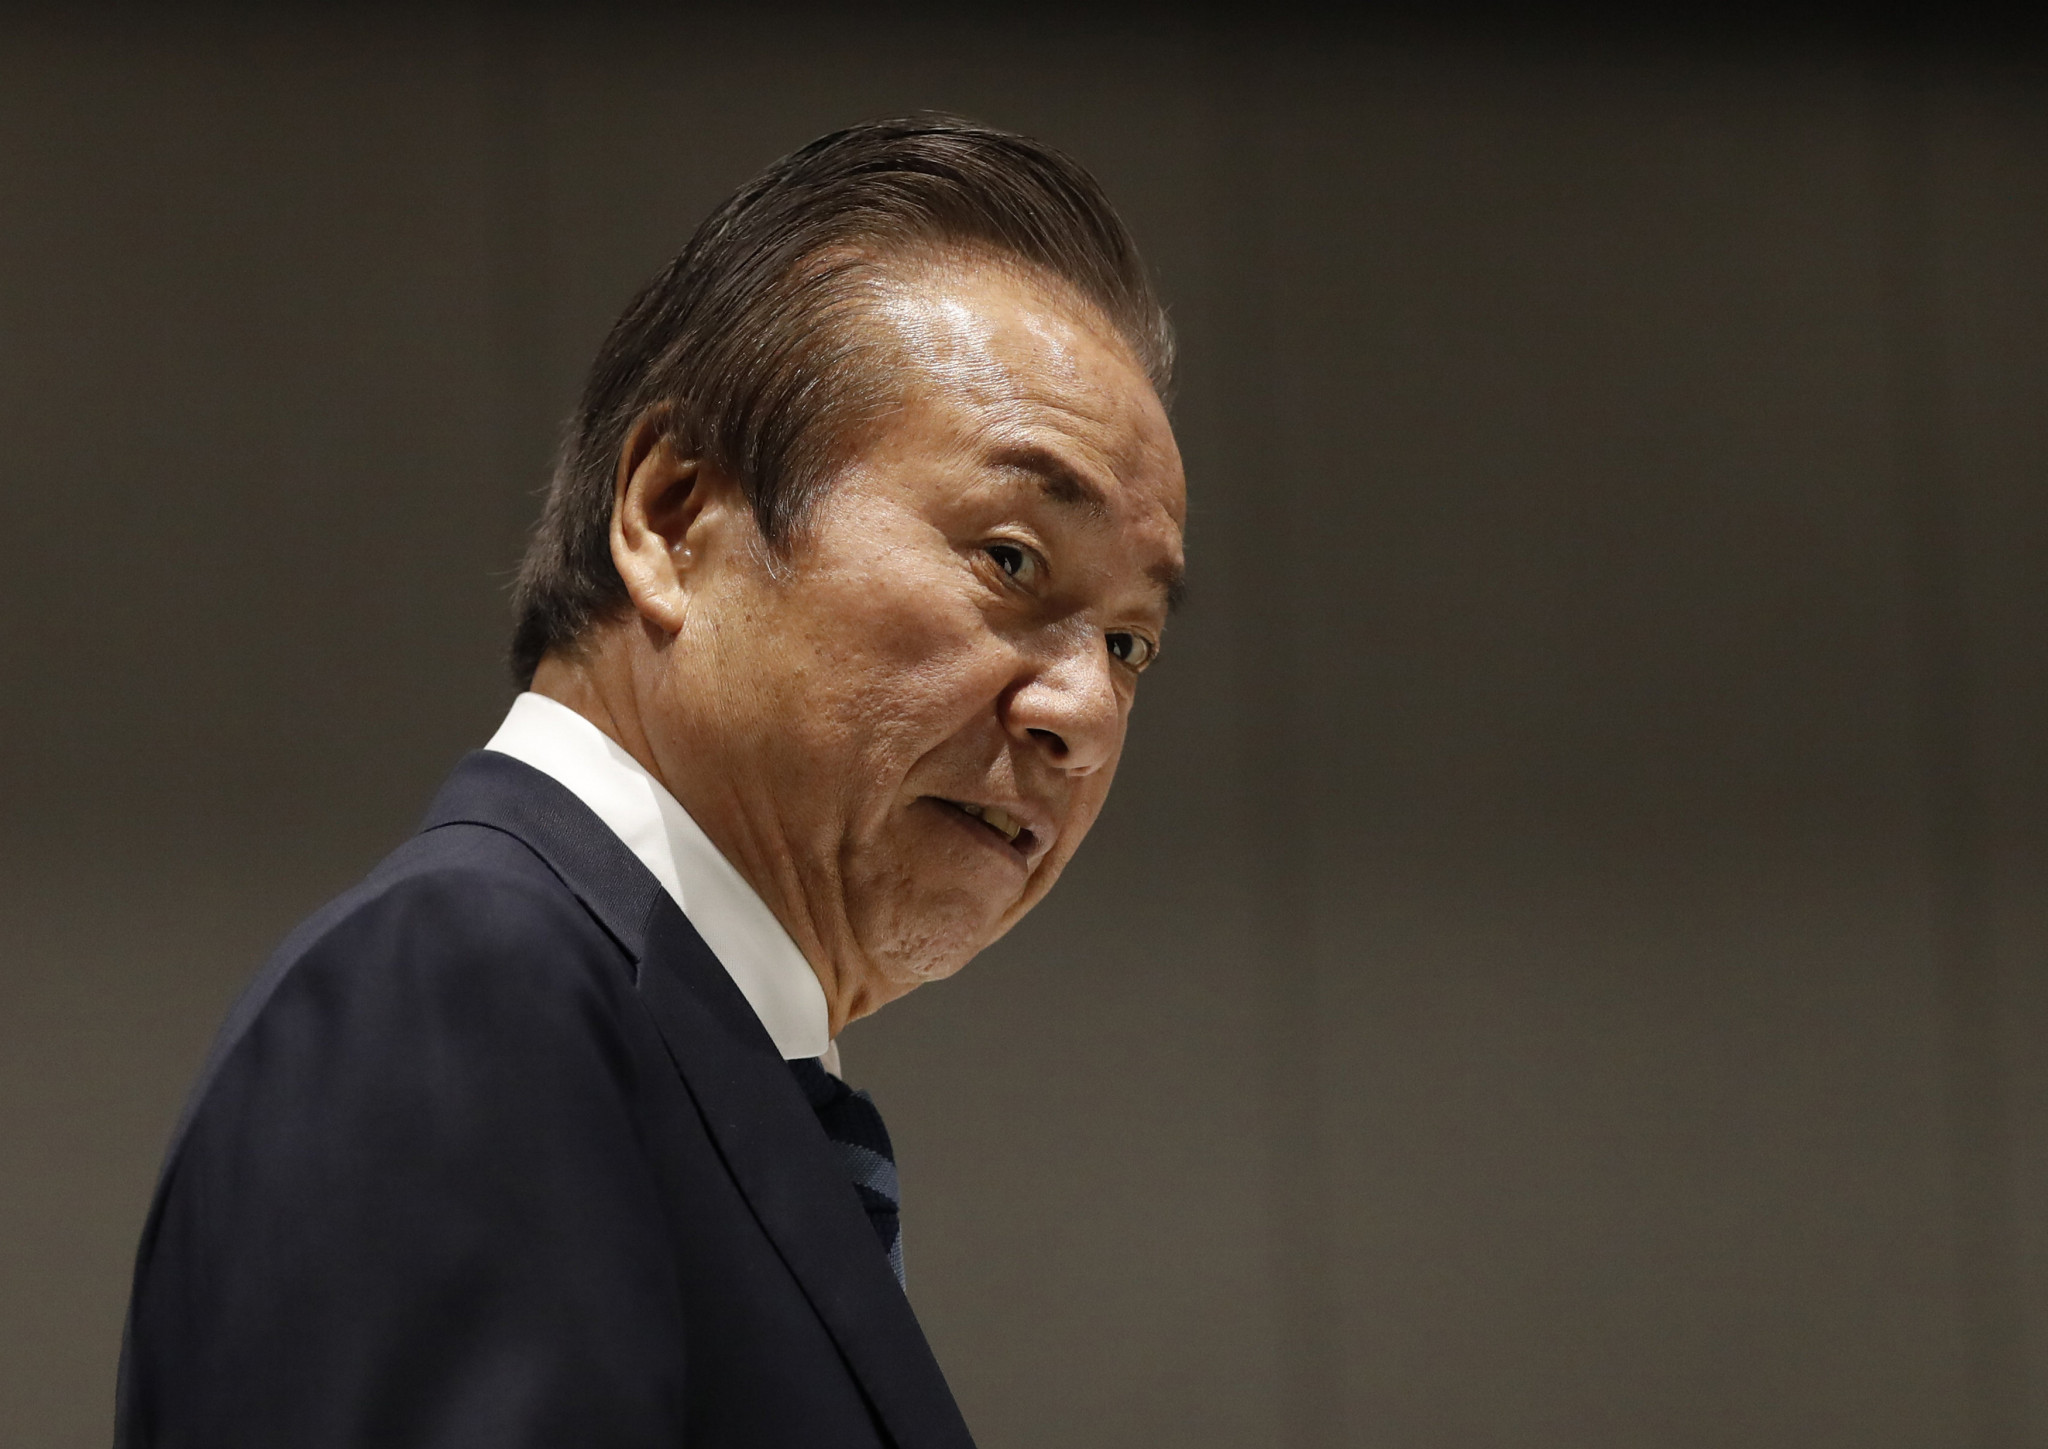 Tokyo 2020 Executive Board member Haruyuki Takahashi has been served with four charges of accepting bribes, which he denies ©Getty Images